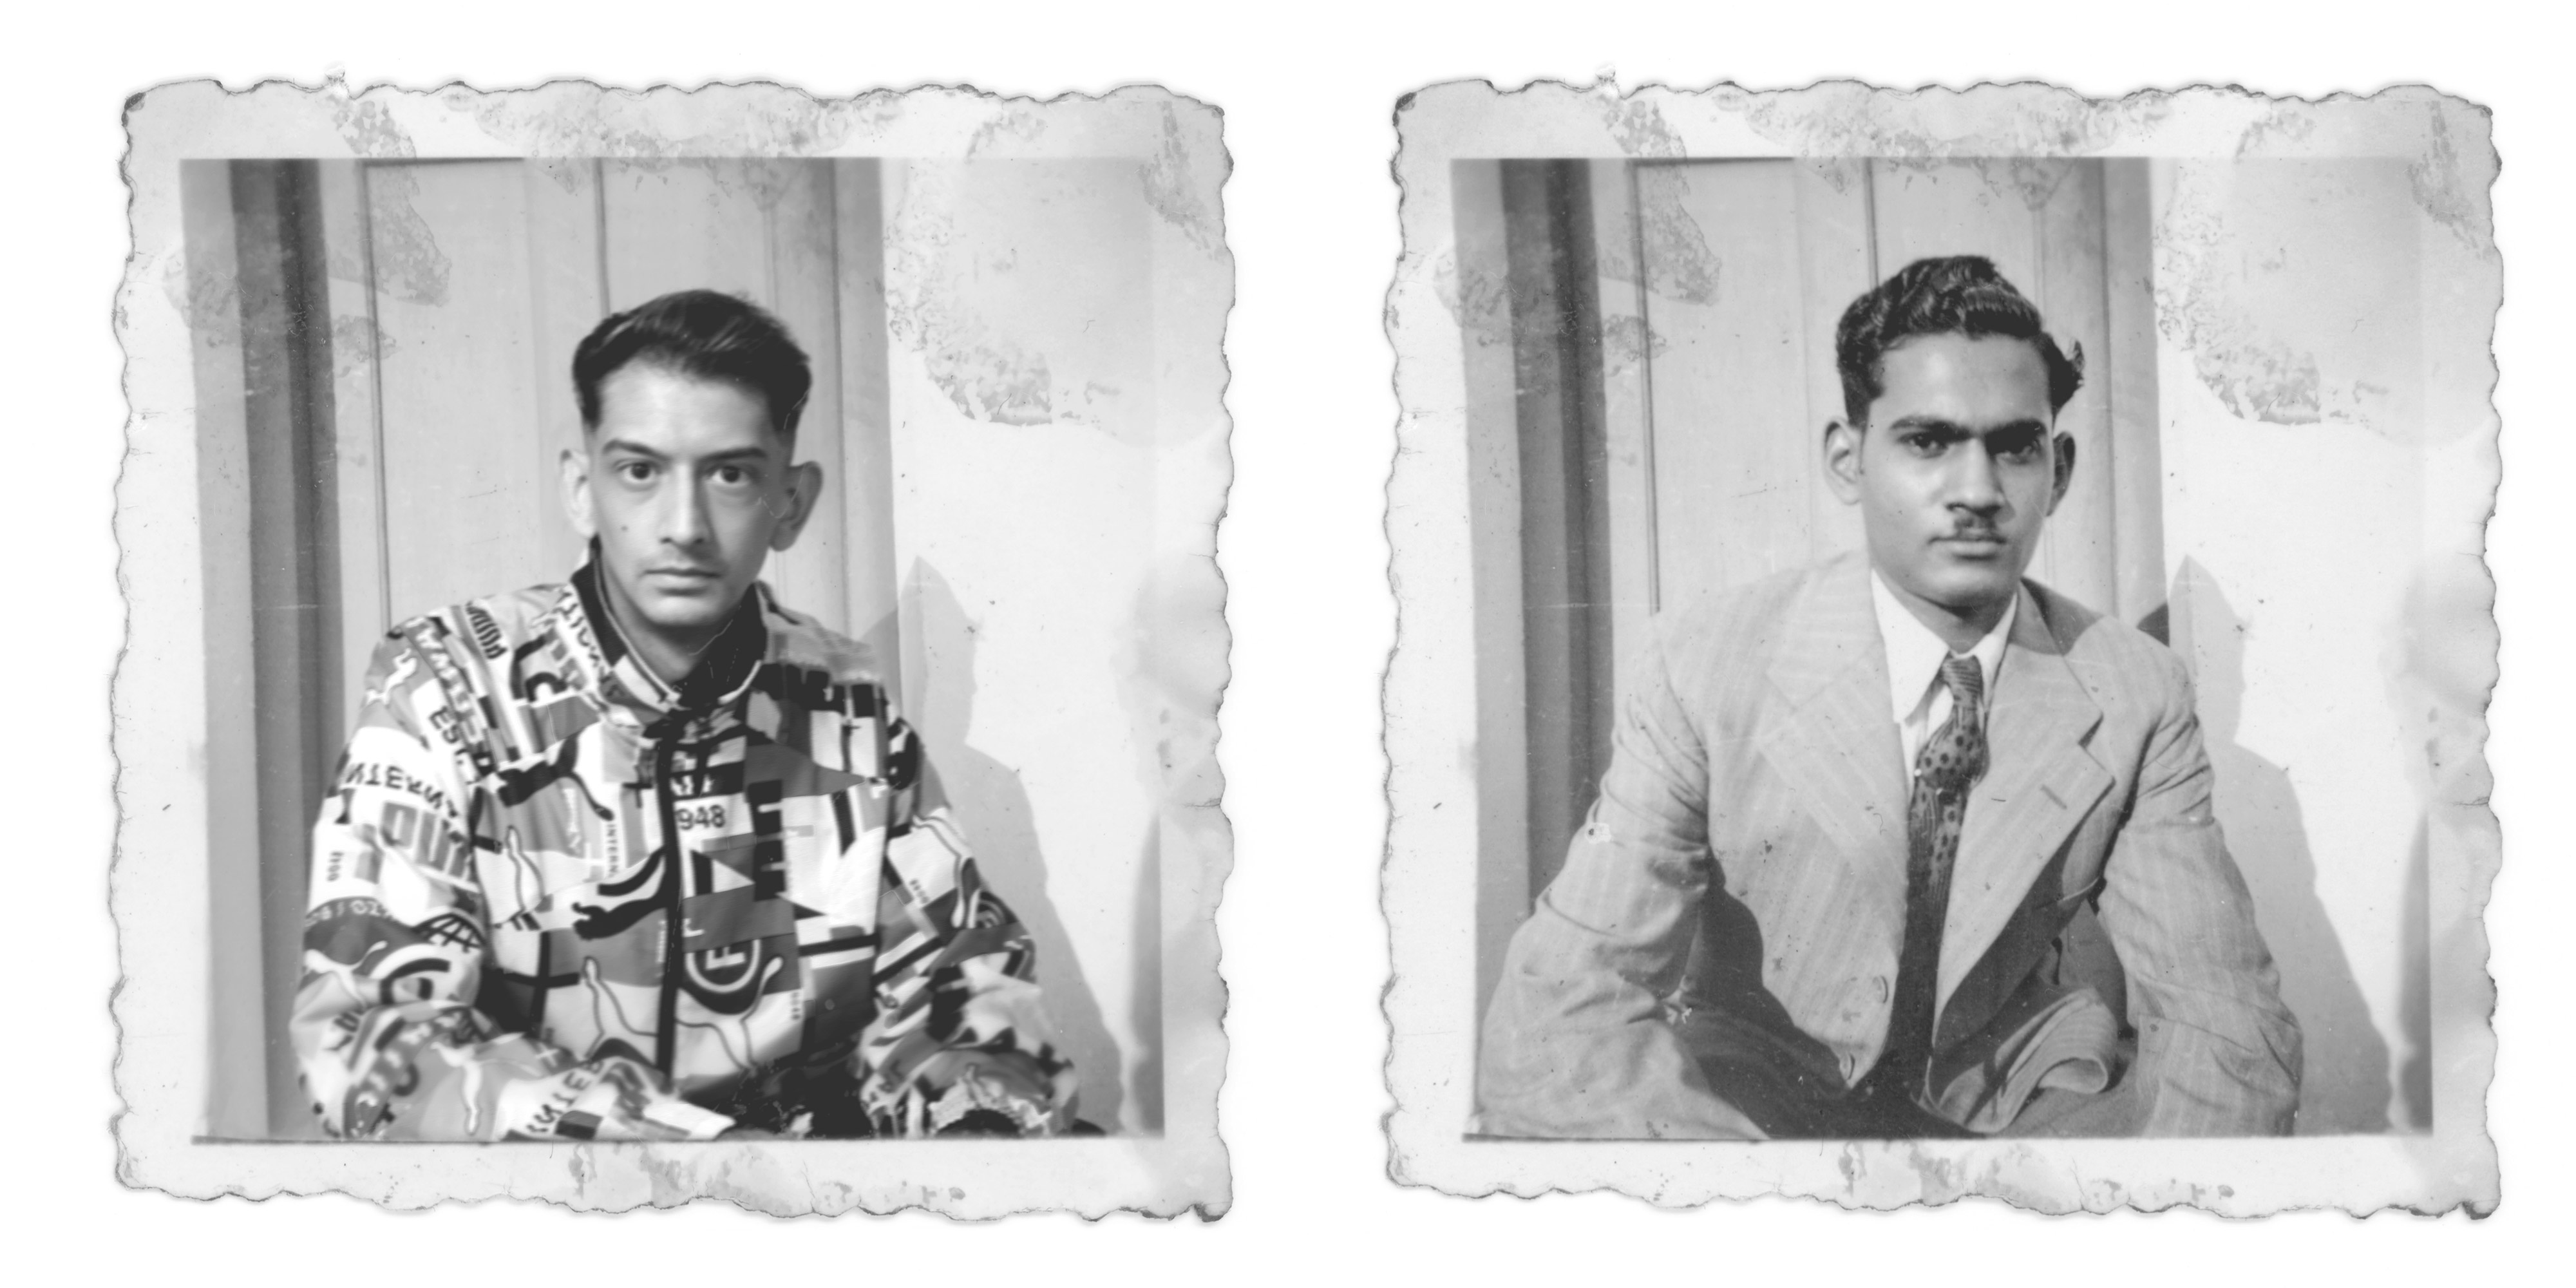 Rosh on the left, his grandfather on the right.